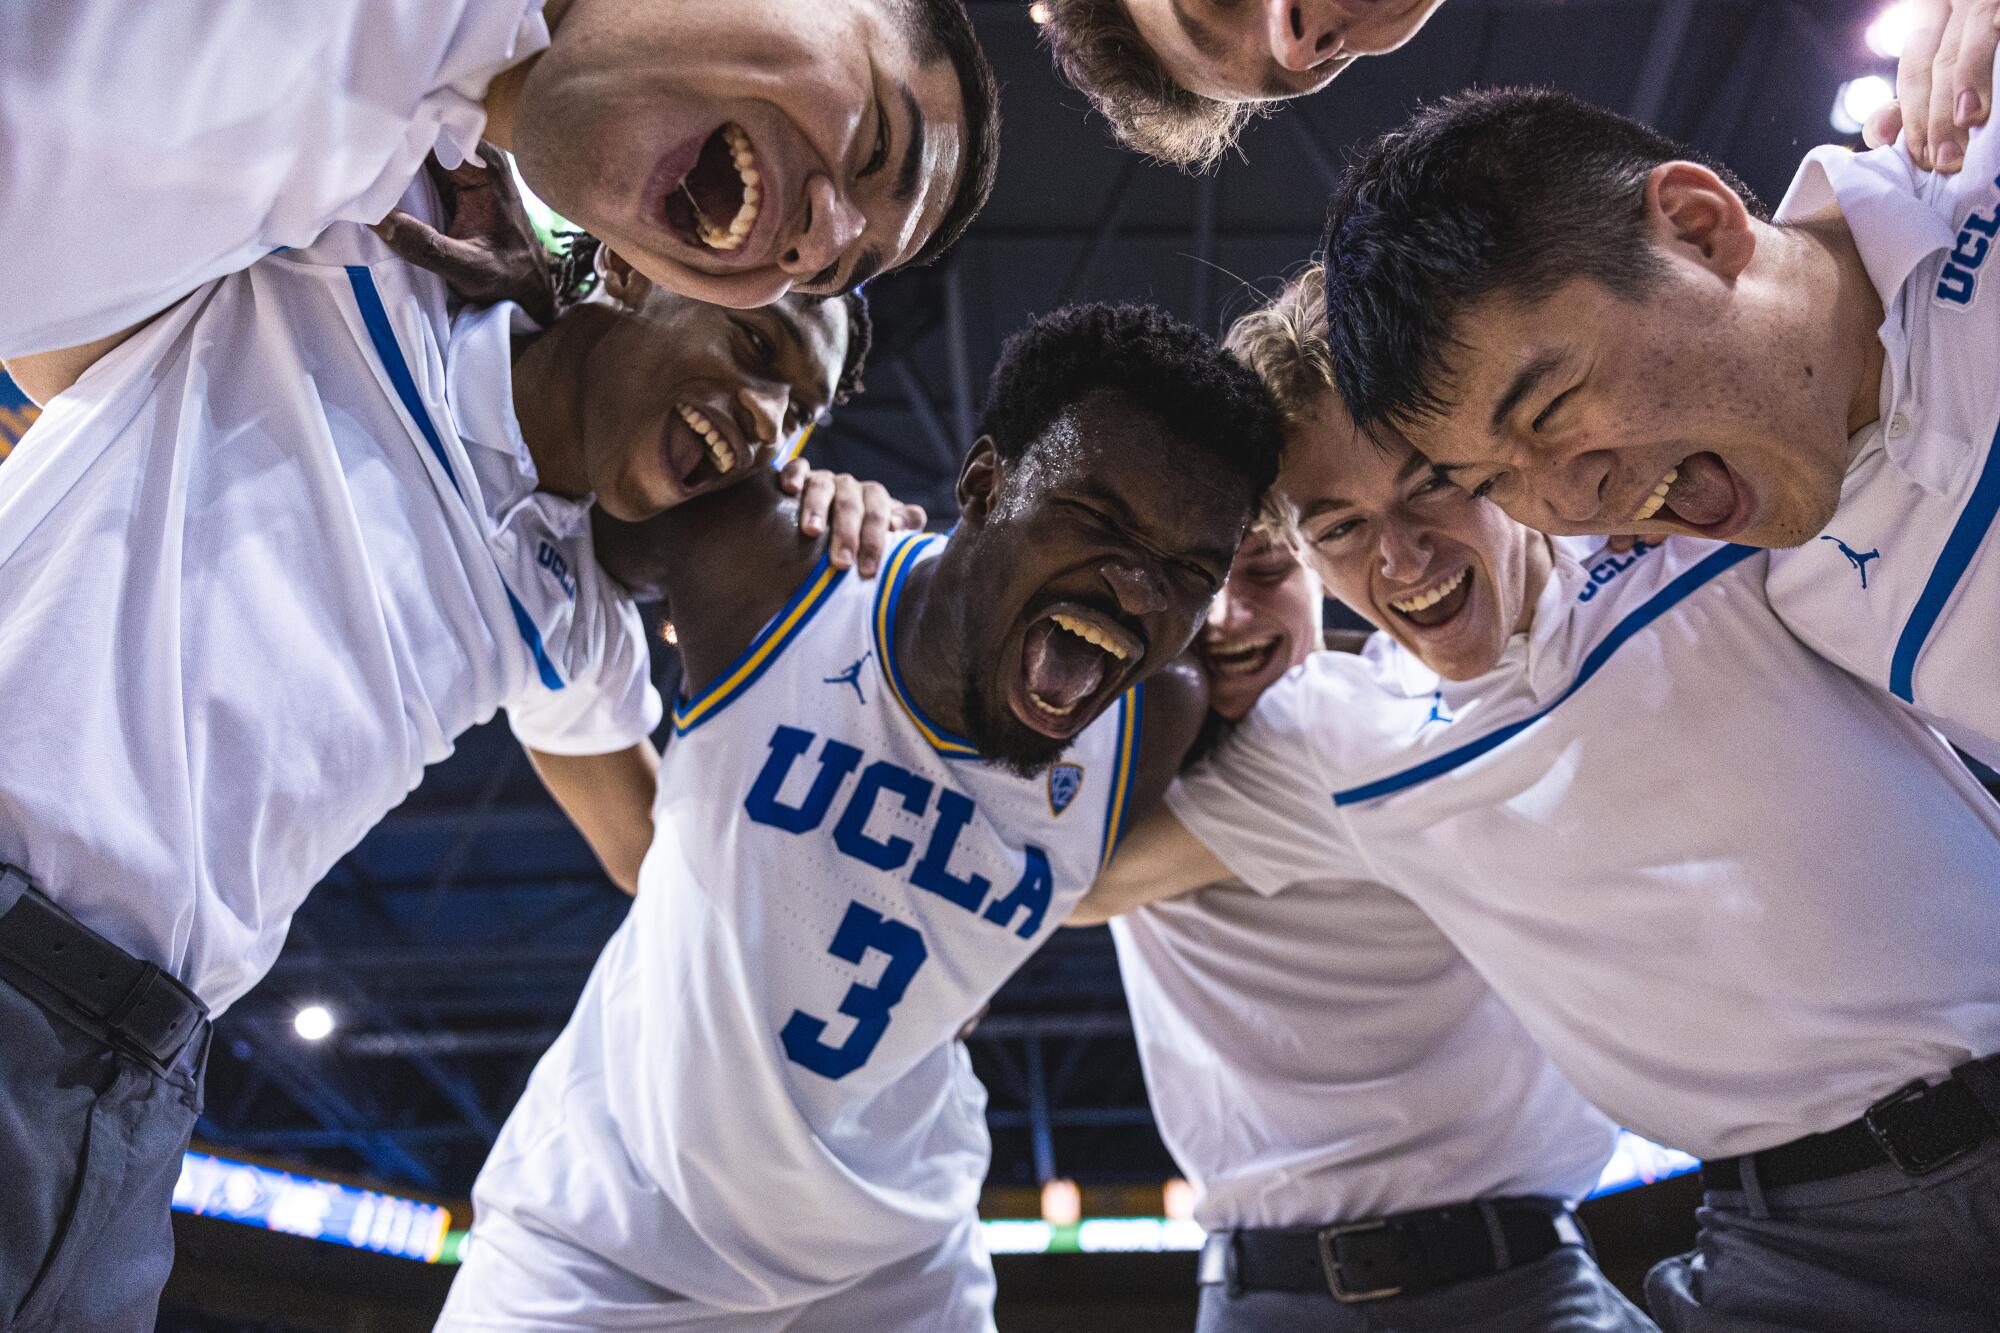 Adem Bona celebrates with UCLA's student managers after a win over Colorado.